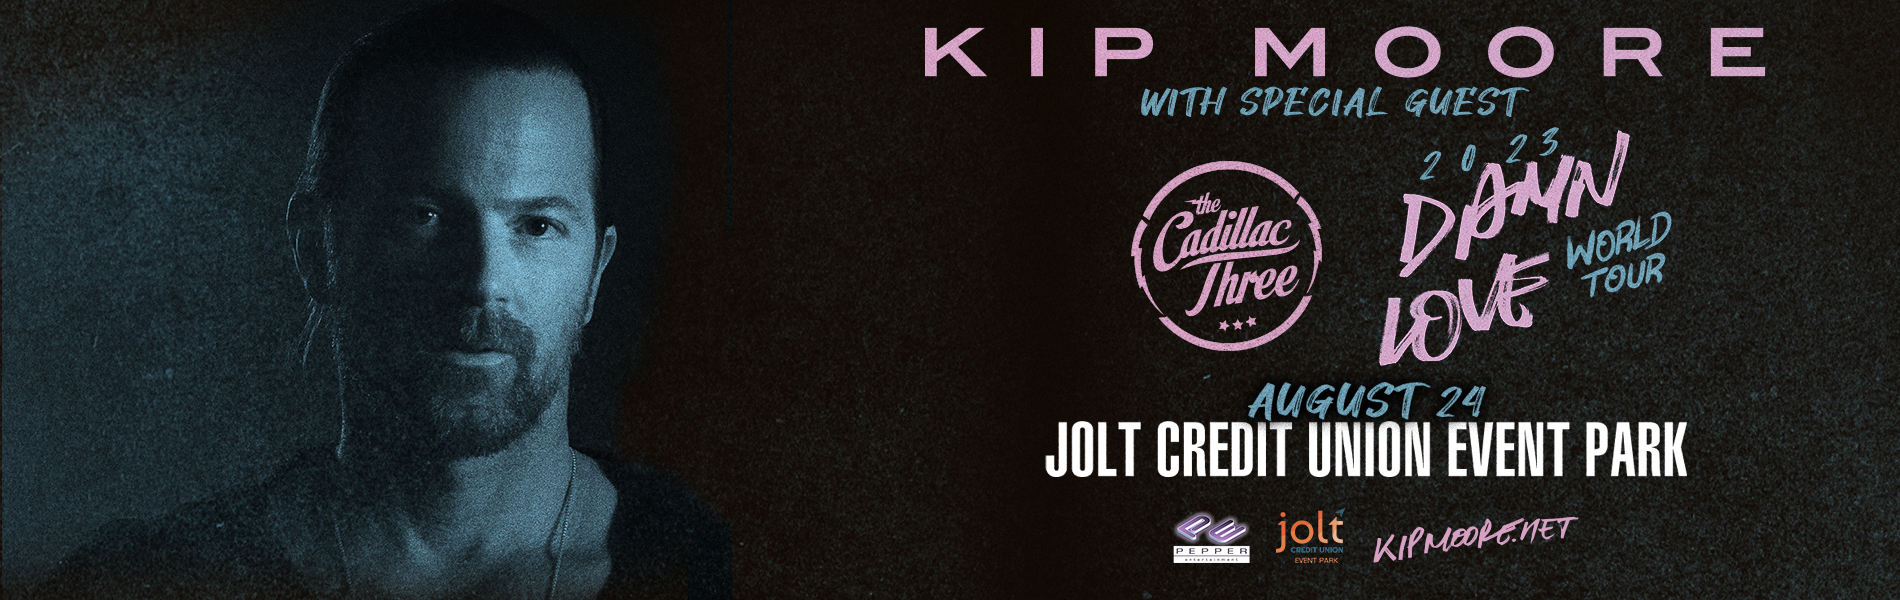 Kip Moore with Special Guest The Cadillac Three